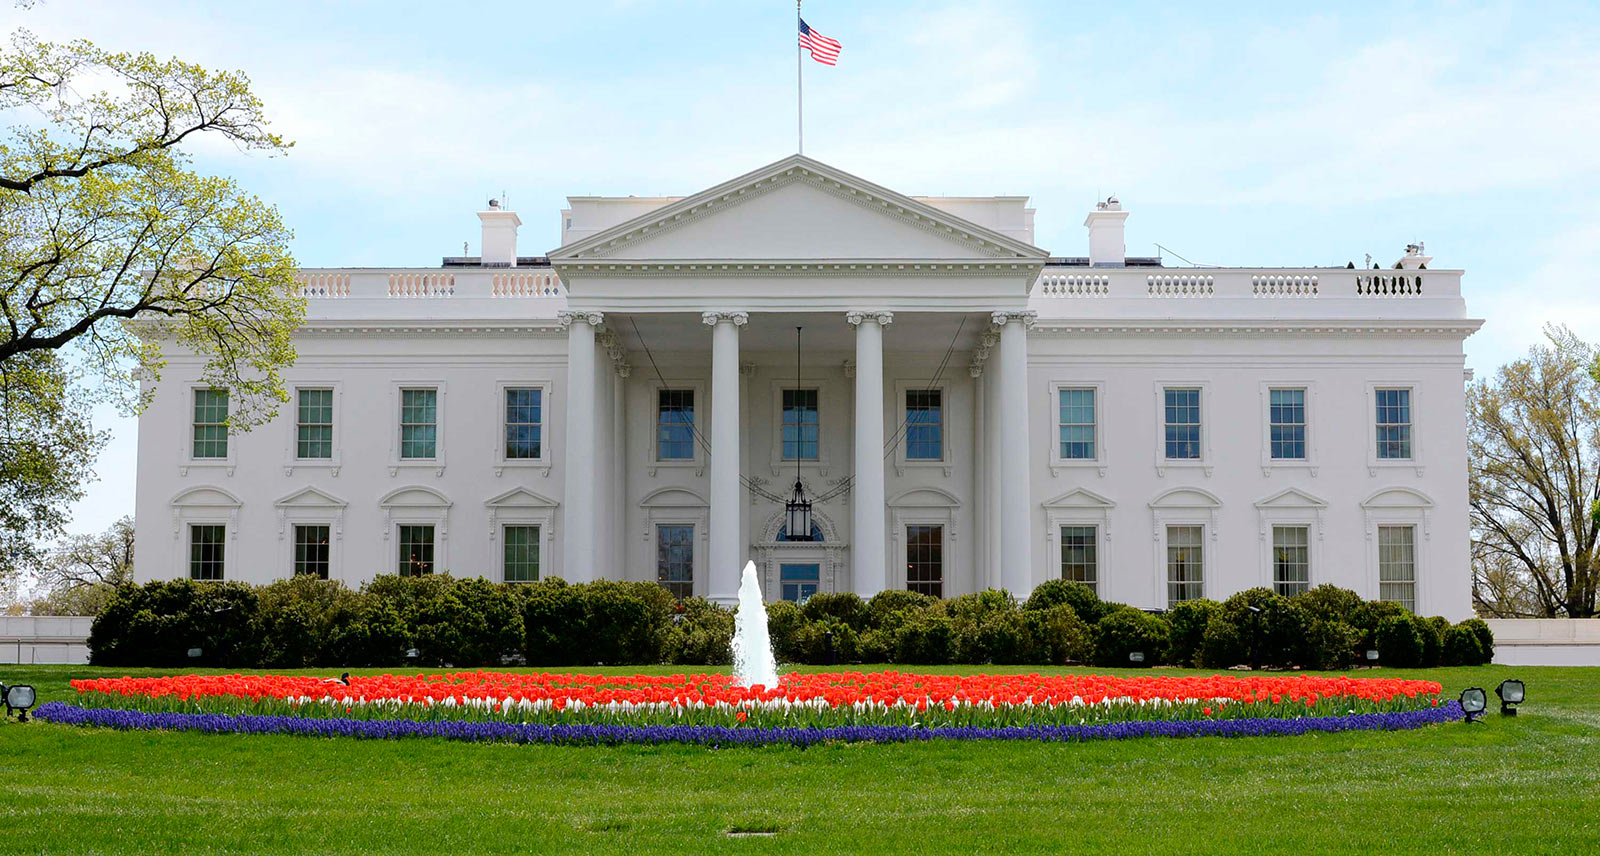 The White House - North Lawn and Entrance - Washington, DC